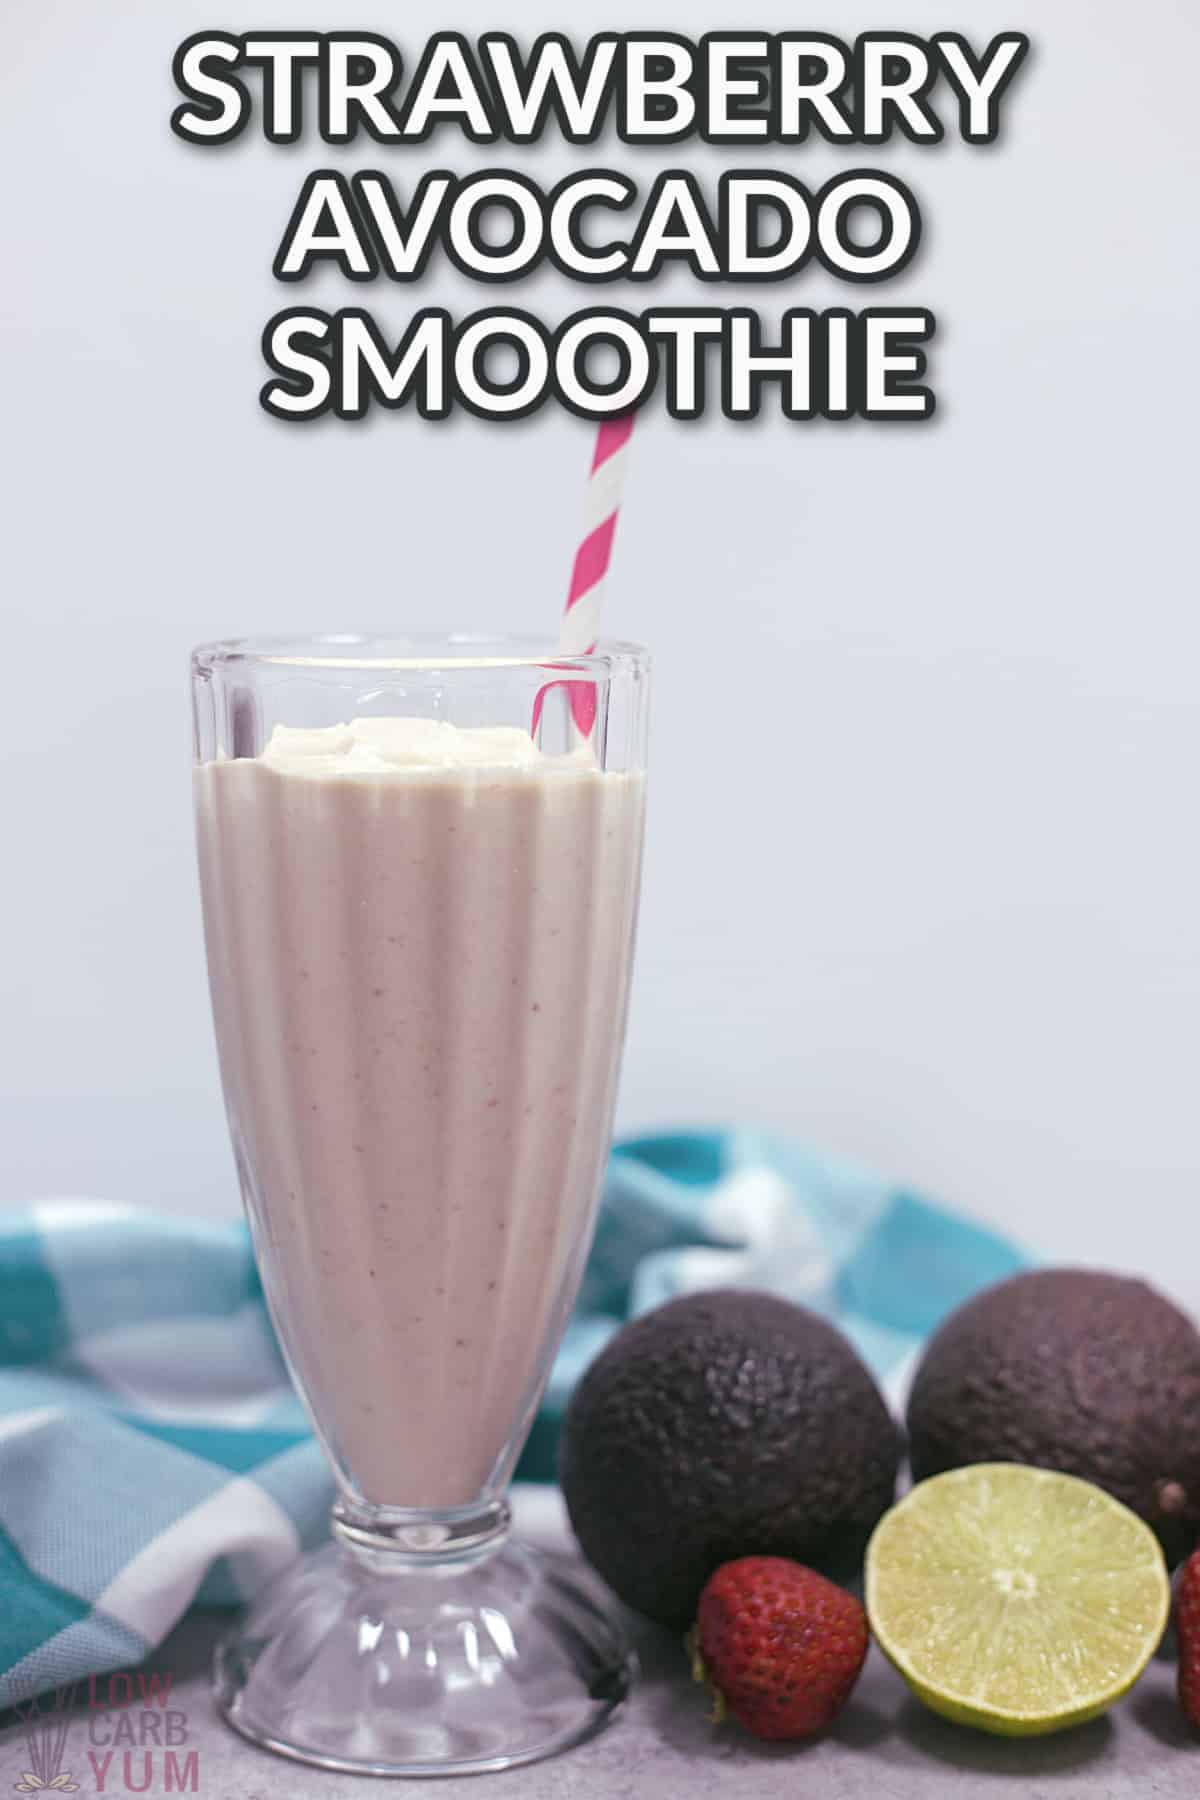 strawberry avocado smoothie with text overlaly.